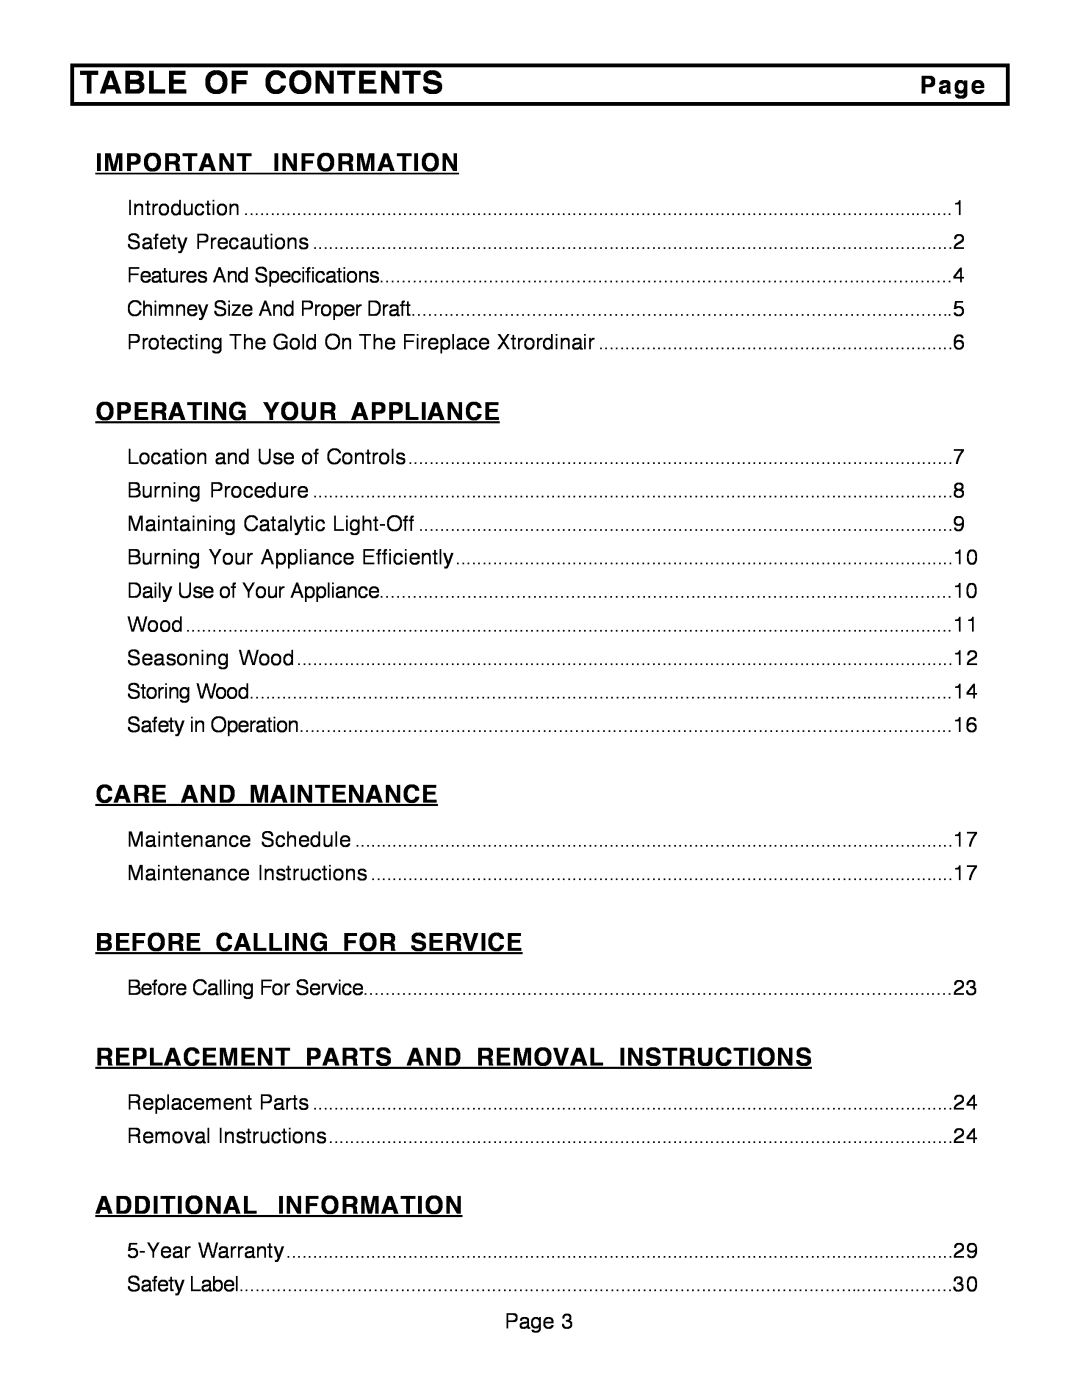 FireplaceXtrordinair 36A-ZC Table Of Contents, Page, Important Information, Operating Your Appliance, Care And Maintenance 